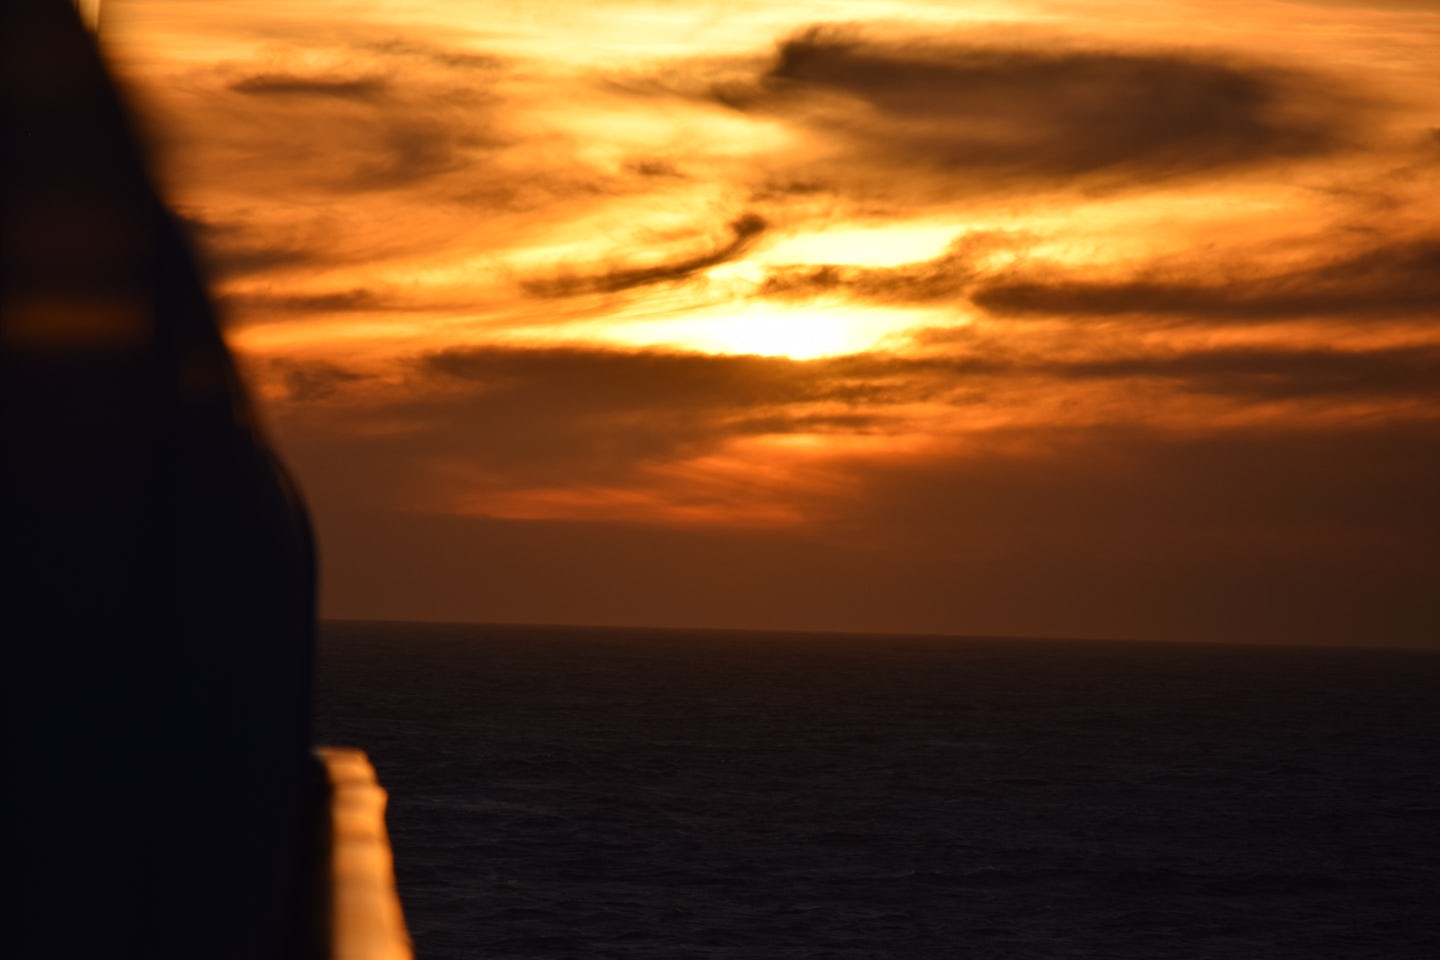 Watching the sunset from our balcony is always a wonderful way to end a day of cruising!